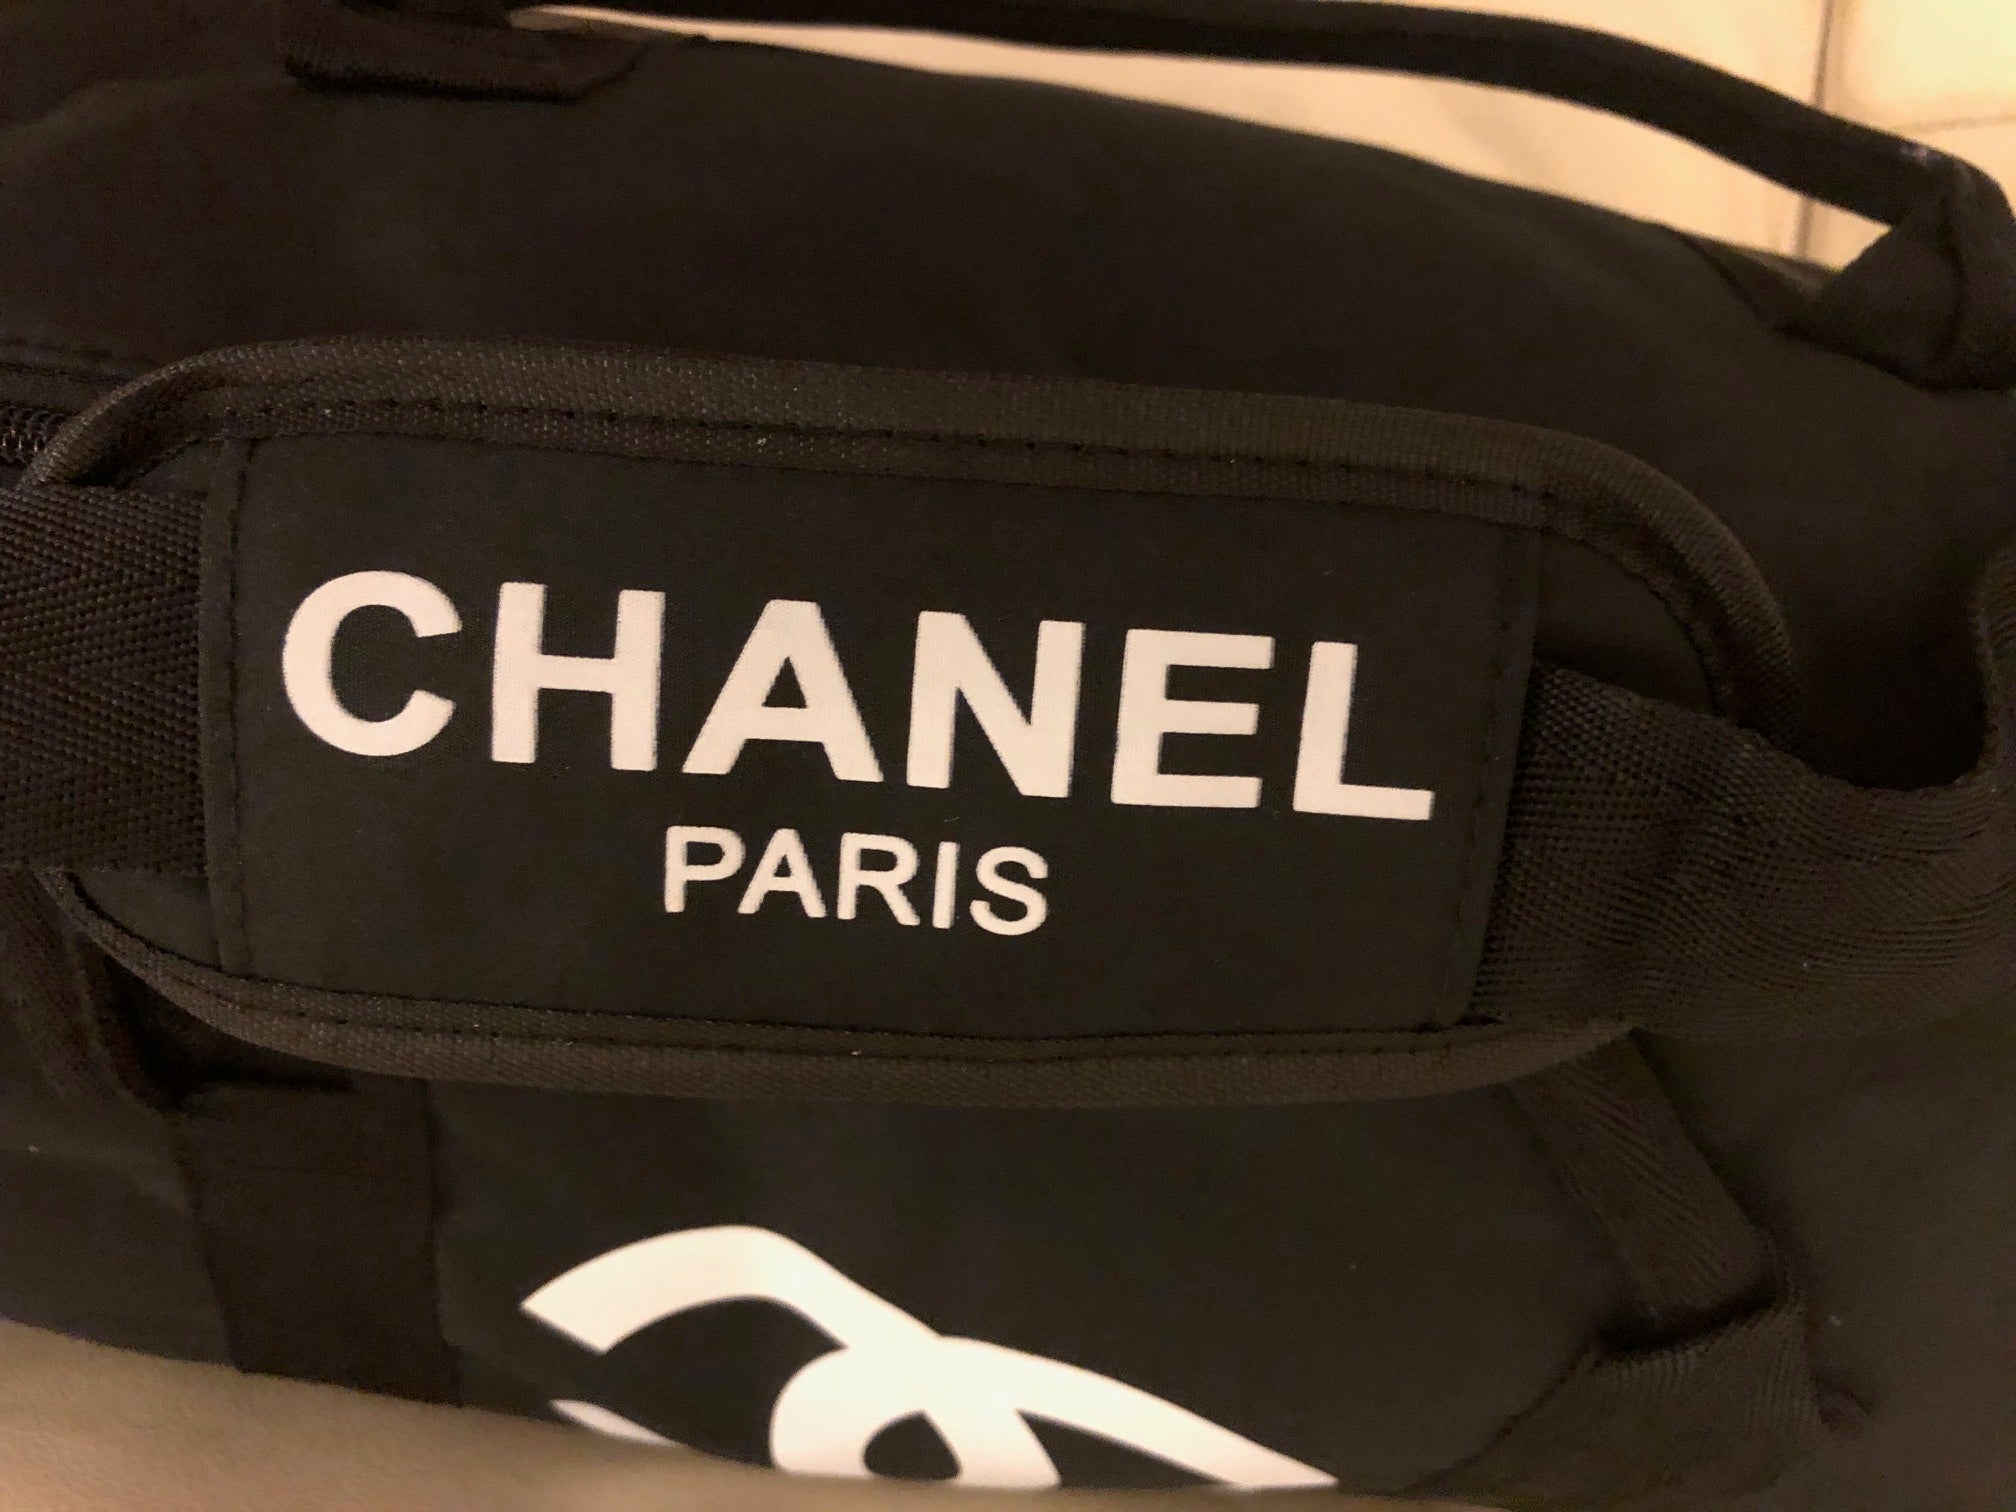 Chanel Vip Gift Bag - 2 For Sale on 1stDibs  chanel vip gift crossbody  bag, chanel vip gift duffle bag, how to get chanel vip gifts